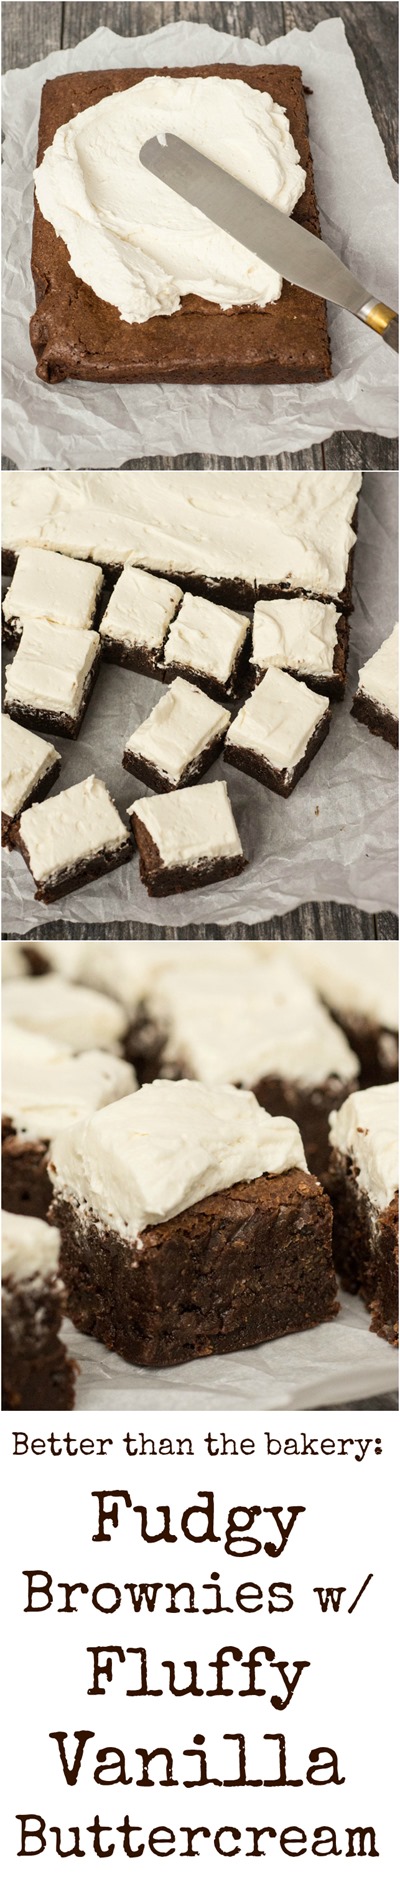 Brownies w Vanilla Buttercream <---new obsession!